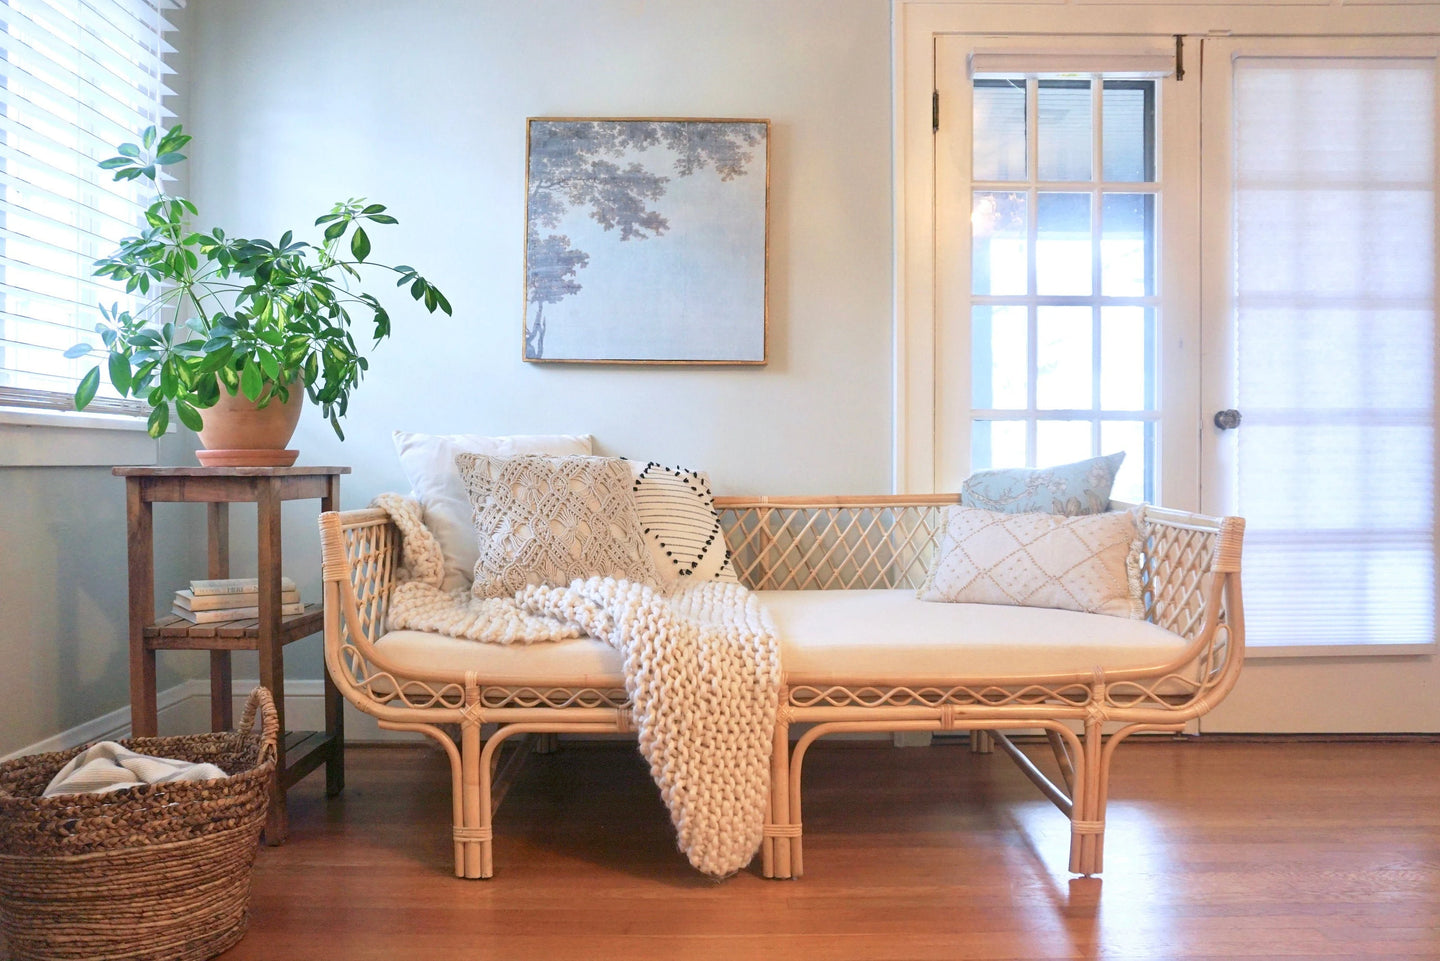 PRE-ORDER Morrocan Trellis Daybed